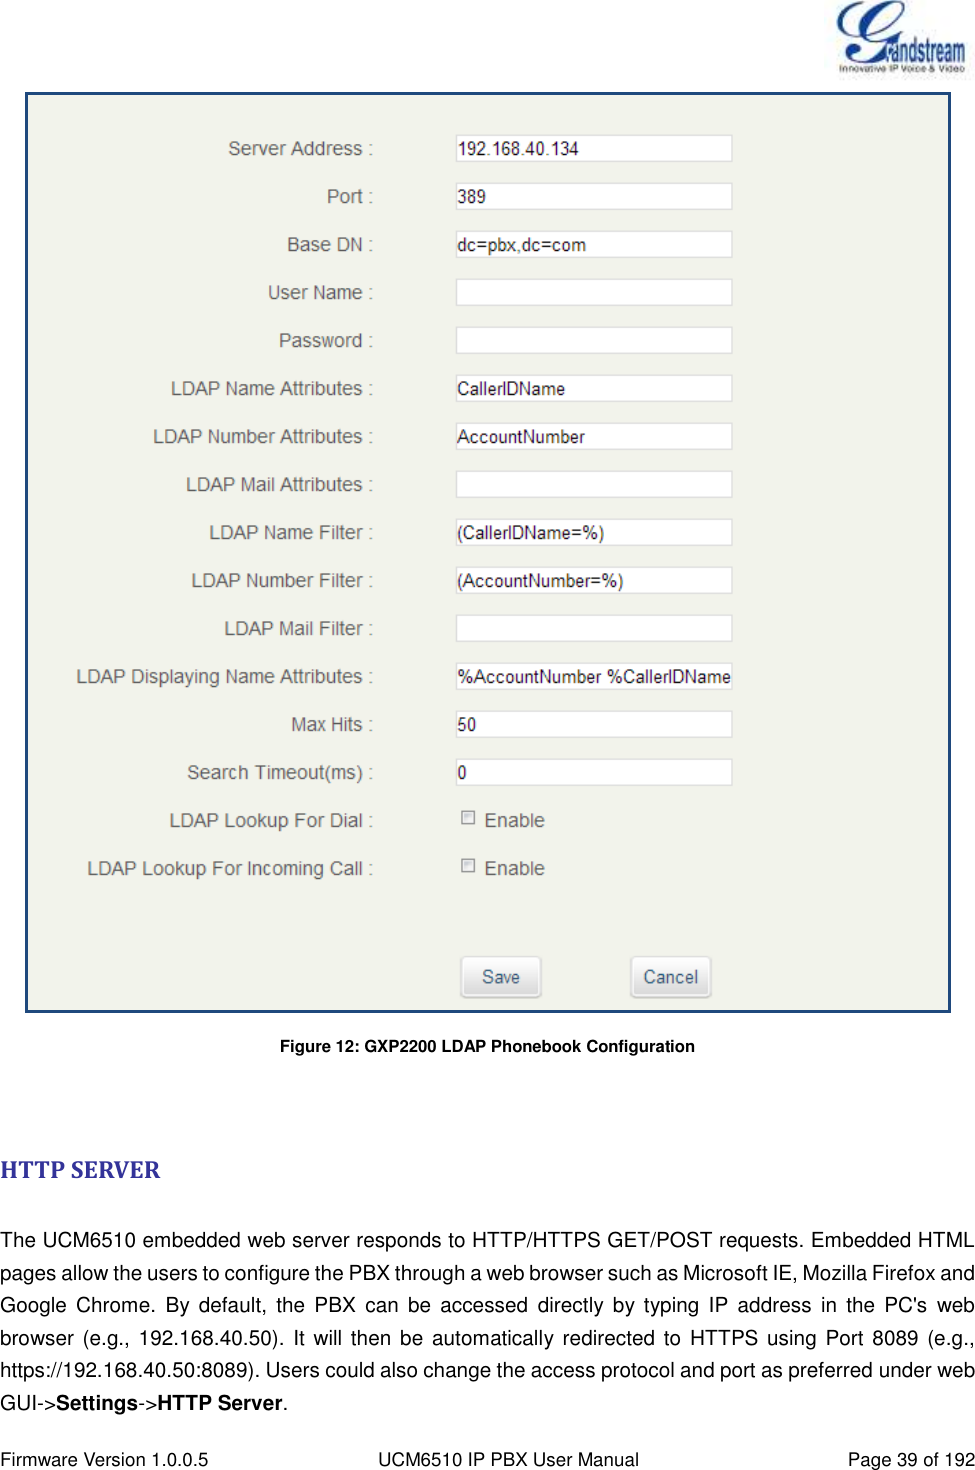  Firmware Version 1.0.0.5 UCM6510 IP PBX User Manual Page 39 of 192   Figure 12: GXP2200 LDAP Phonebook Configuration   HTTP SERVER  The UCM6510 embedded web server responds to HTTP/HTTPS GET/POST requests. Embedded HTML pages allow the users to configure the PBX through a web browser such as Microsoft IE, Mozilla Firefox and Google  Chrome.  By default,  the  PBX  can  be  accessed  directly  by  typing  IP  address  in  the  PC&apos;s  web browser (e.g., 192.168.40.50). It will then be automatically redirected to HTTPS using Port 8089 (e.g., https://192.168.40.50:8089). Users could also change the access protocol and port as preferred under web GUI-&gt;Settings-&gt;HTTP Server. 